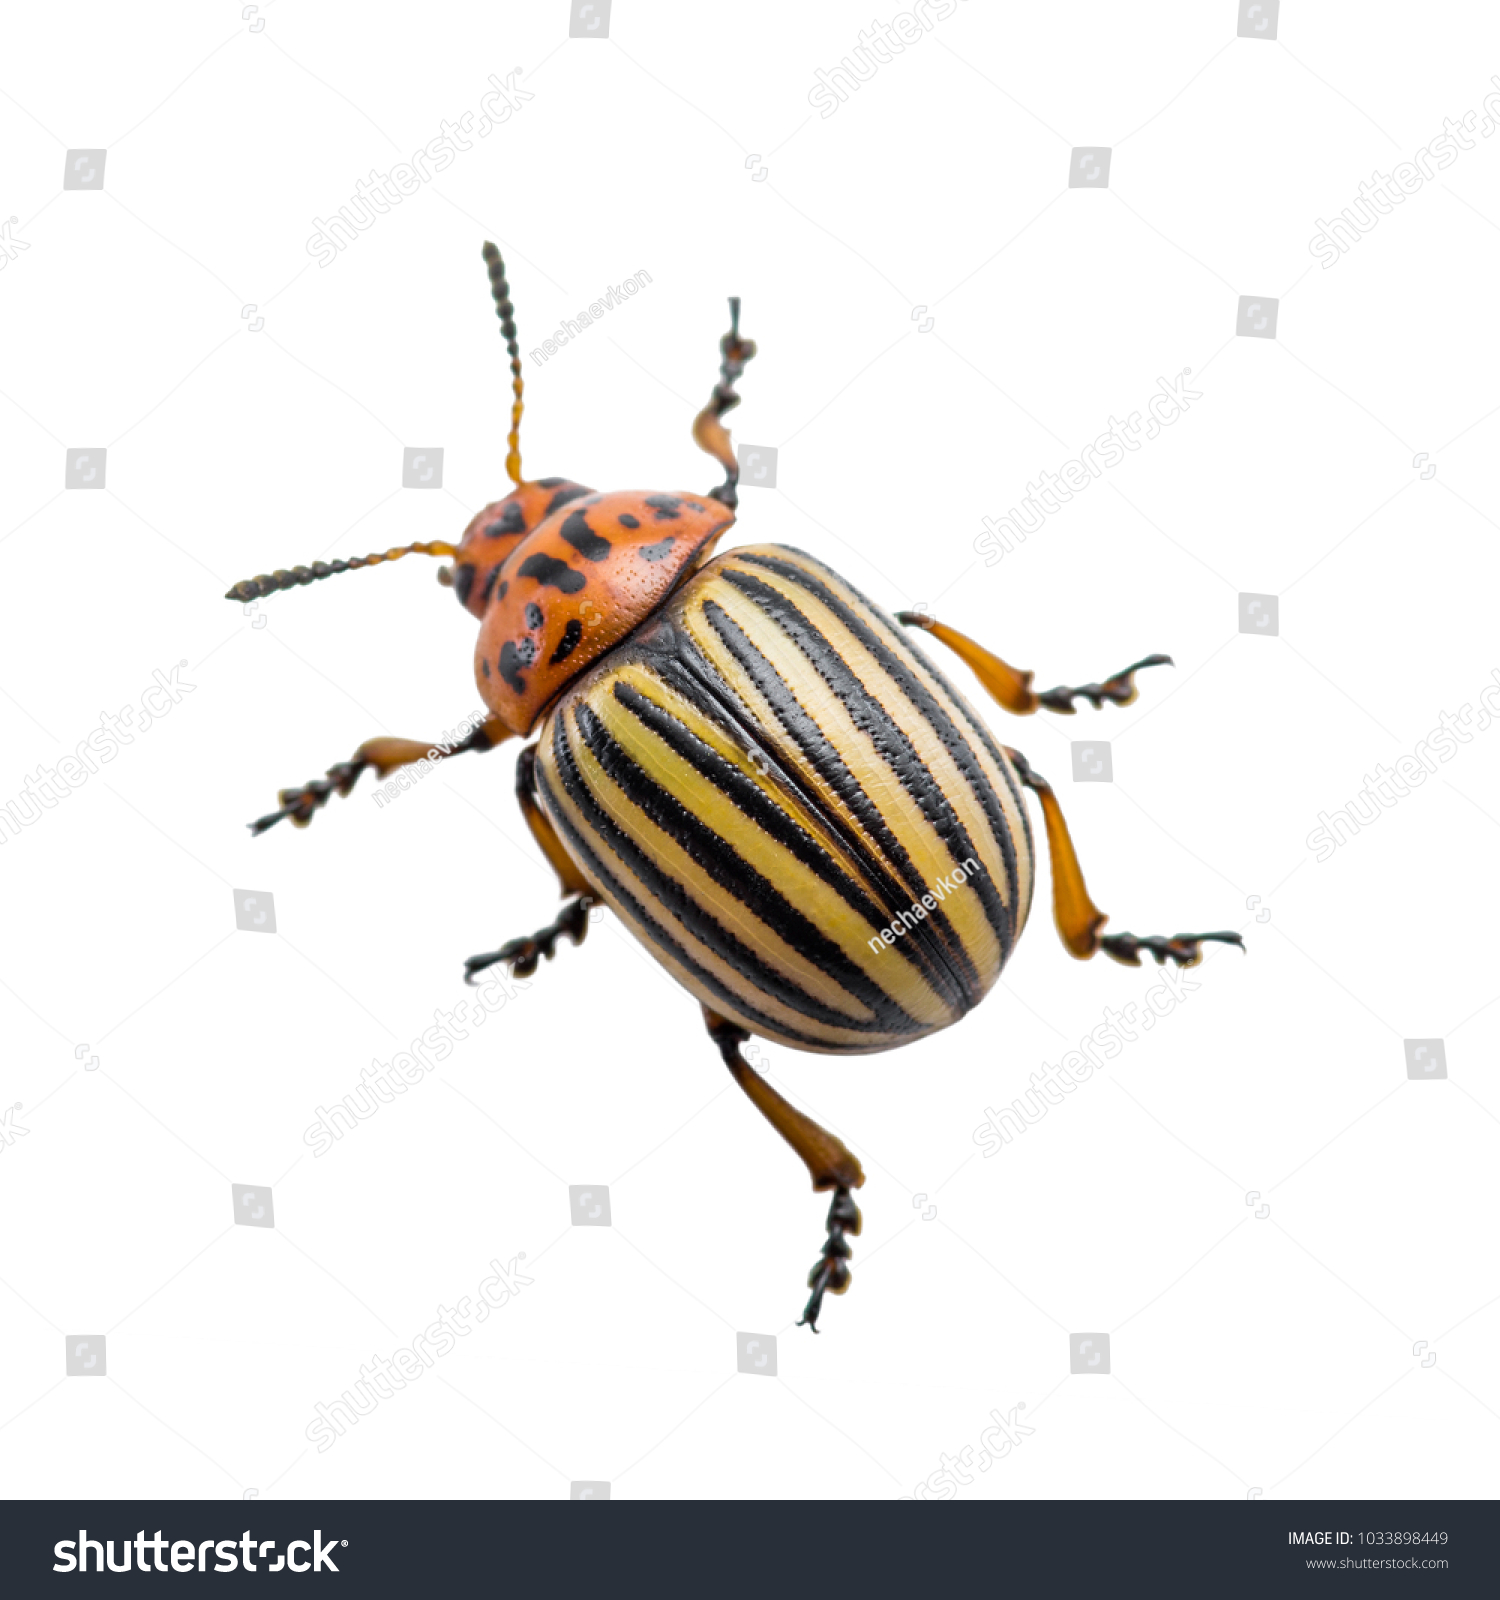 Colorado Potato Beetle Pest Insect Isolated on White #1033898449